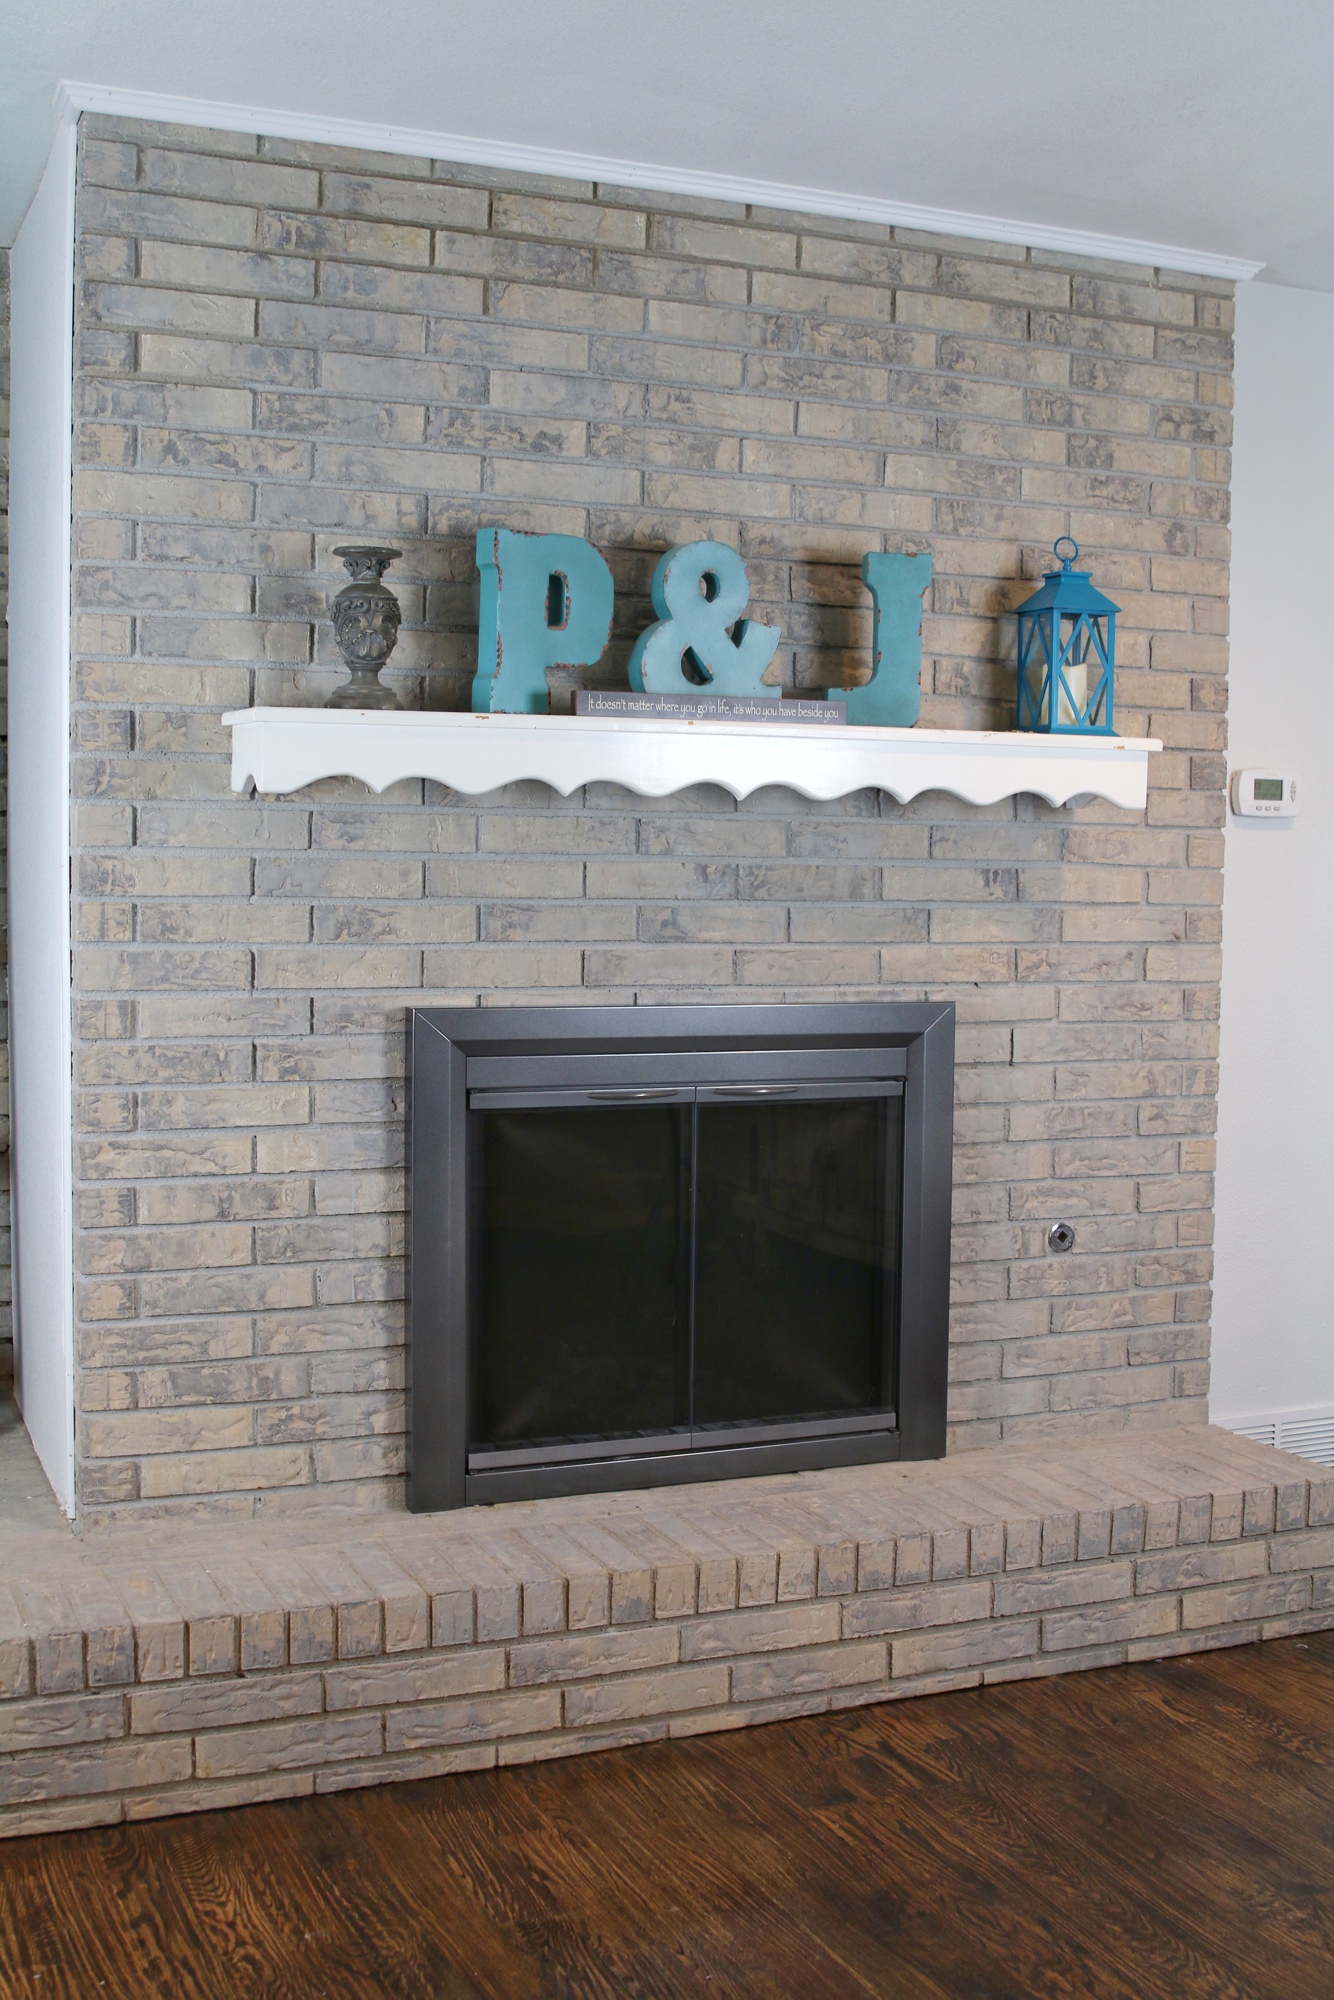 How To Whitewash A Brick Fireplace, Best Paint To Use Whitewash A Brick Fireplace